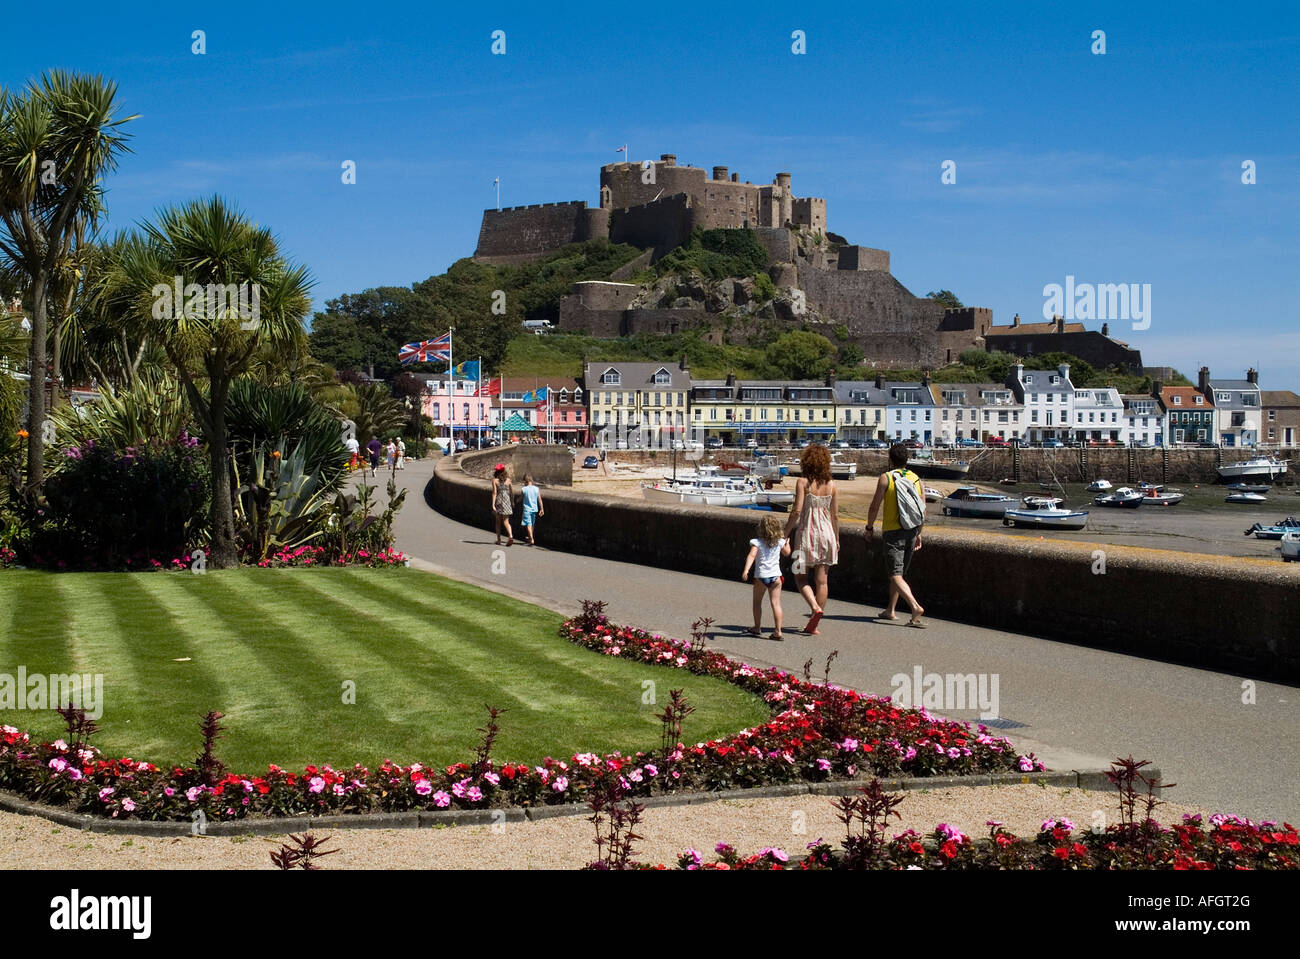 dh Gorey seafront promenade ST MARTIN JERSEY Family holiday walking Mont Orgueil Castle channel islands uk esplanade walk tourists Stock Photo